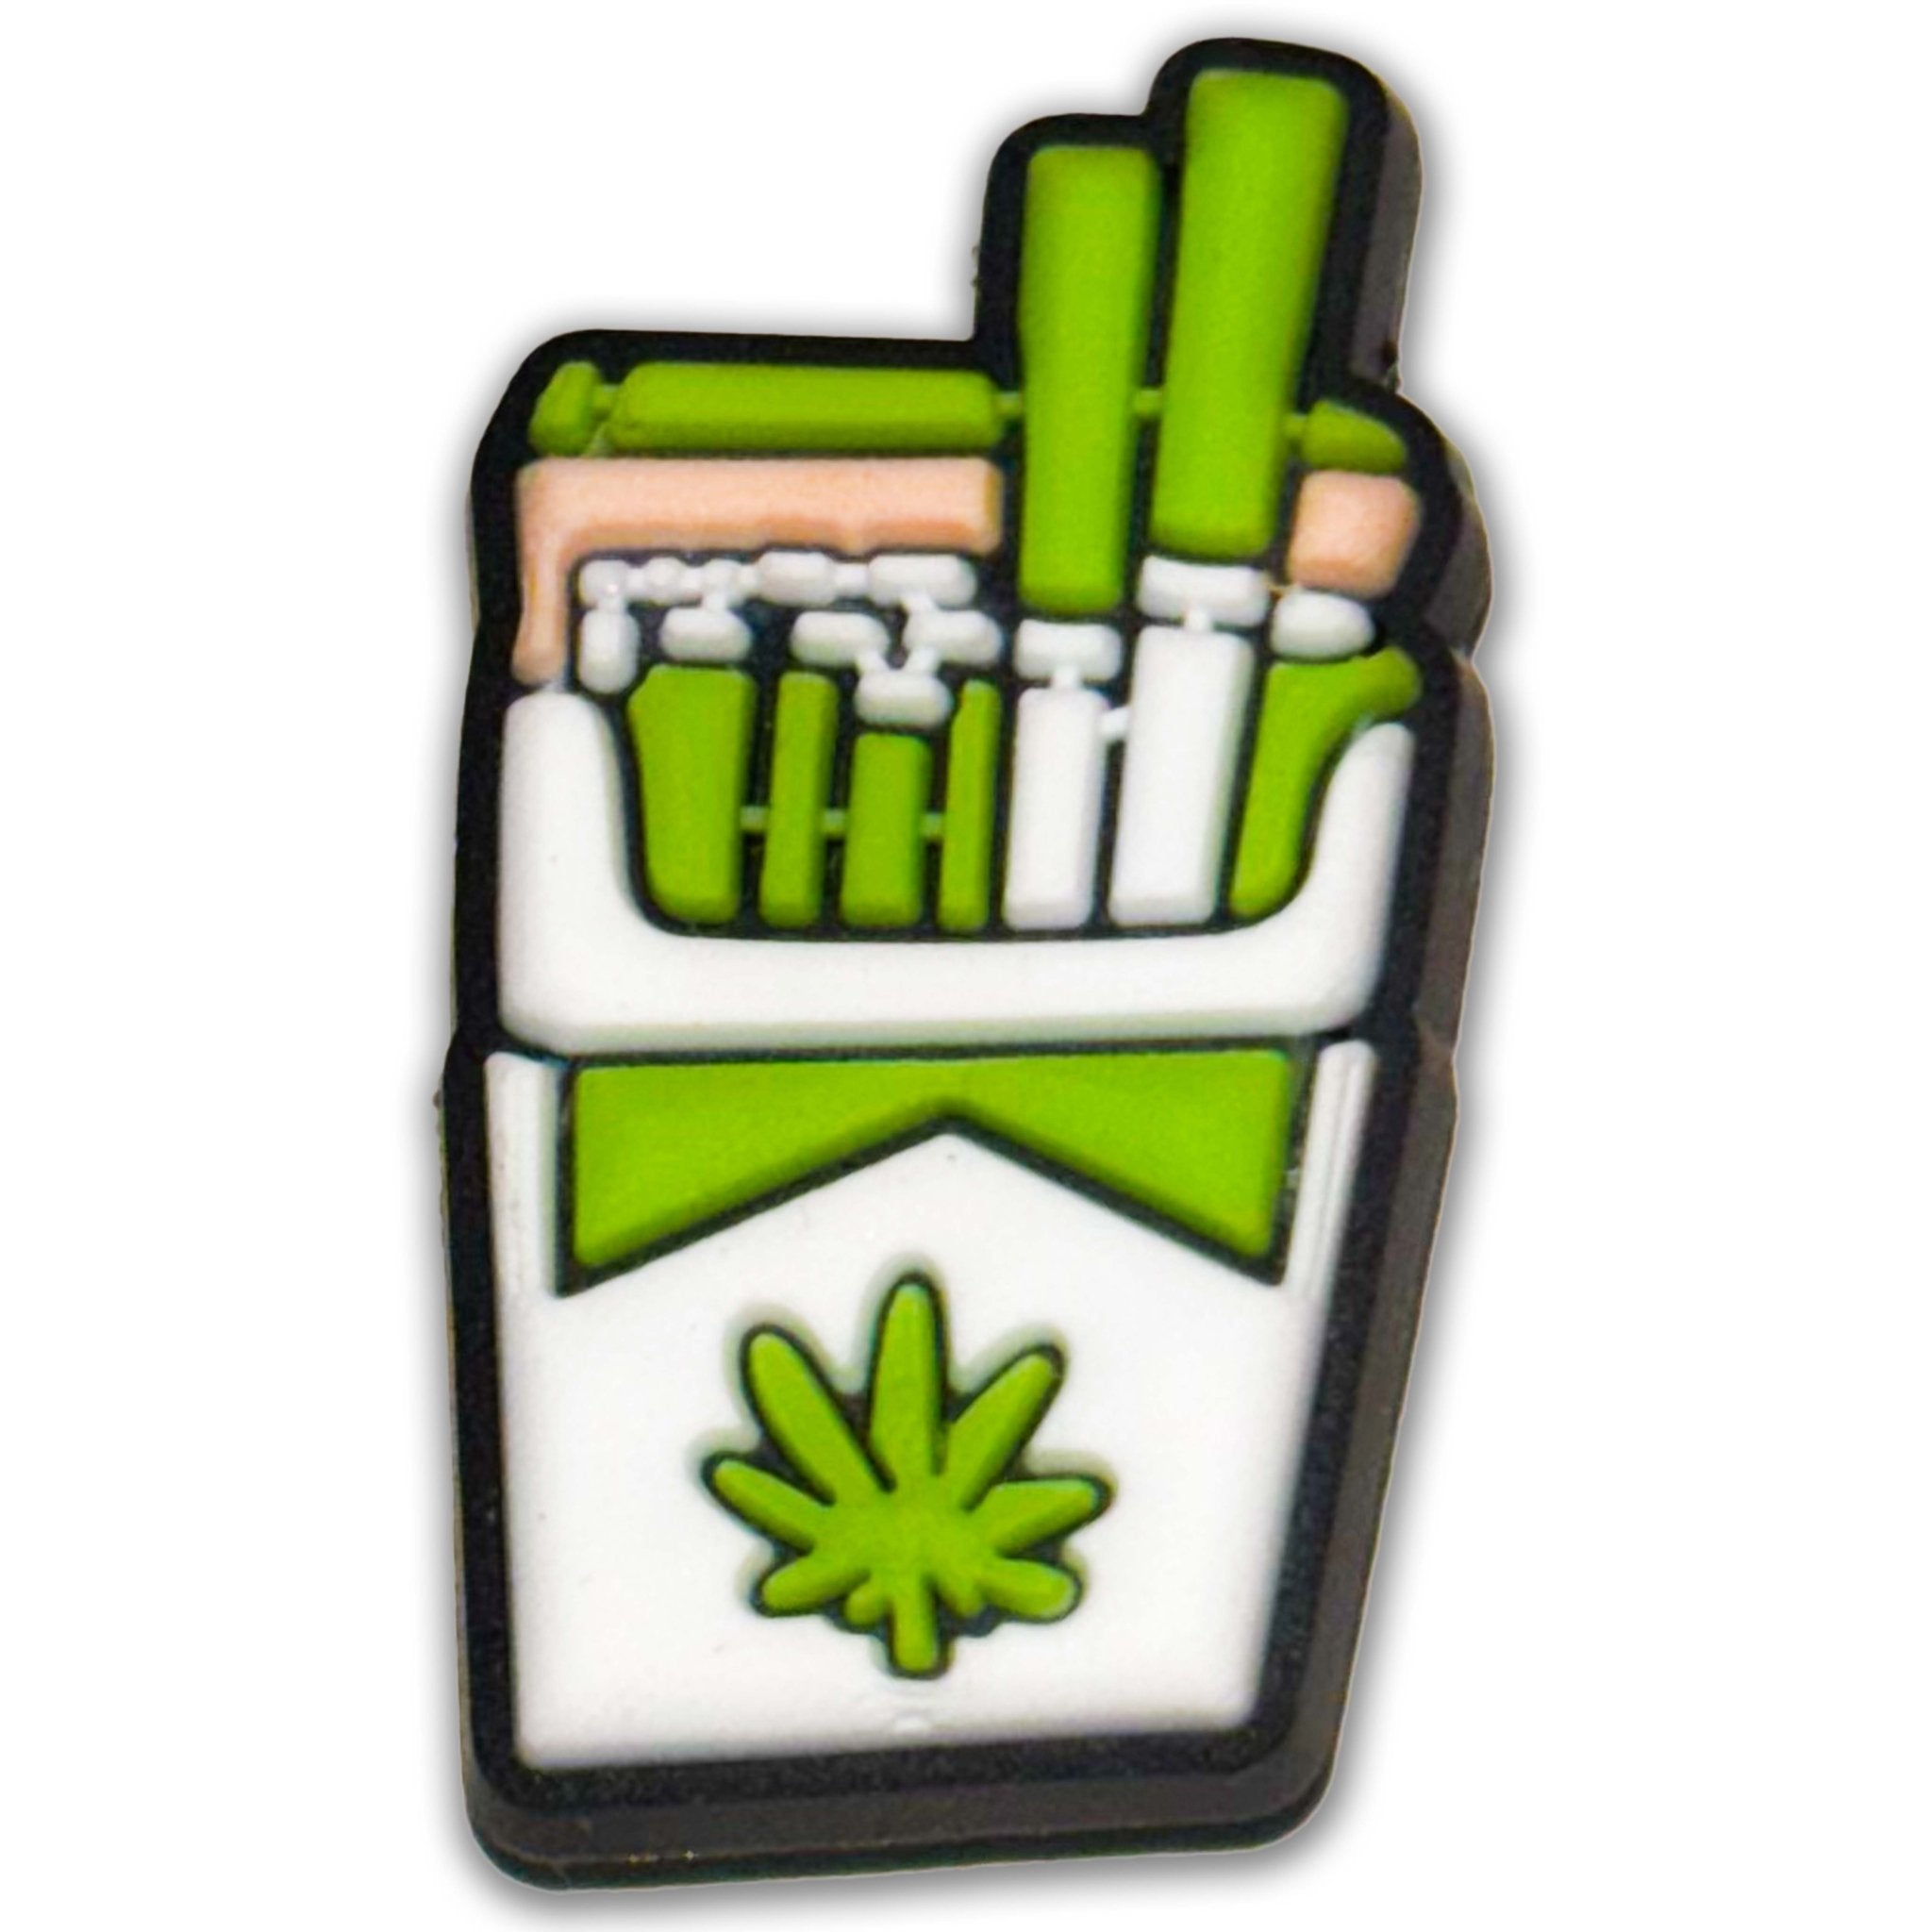 🍀 Weeed Cigarette Box Shoe Charm: Stylish Sneaker Accent - Questsole